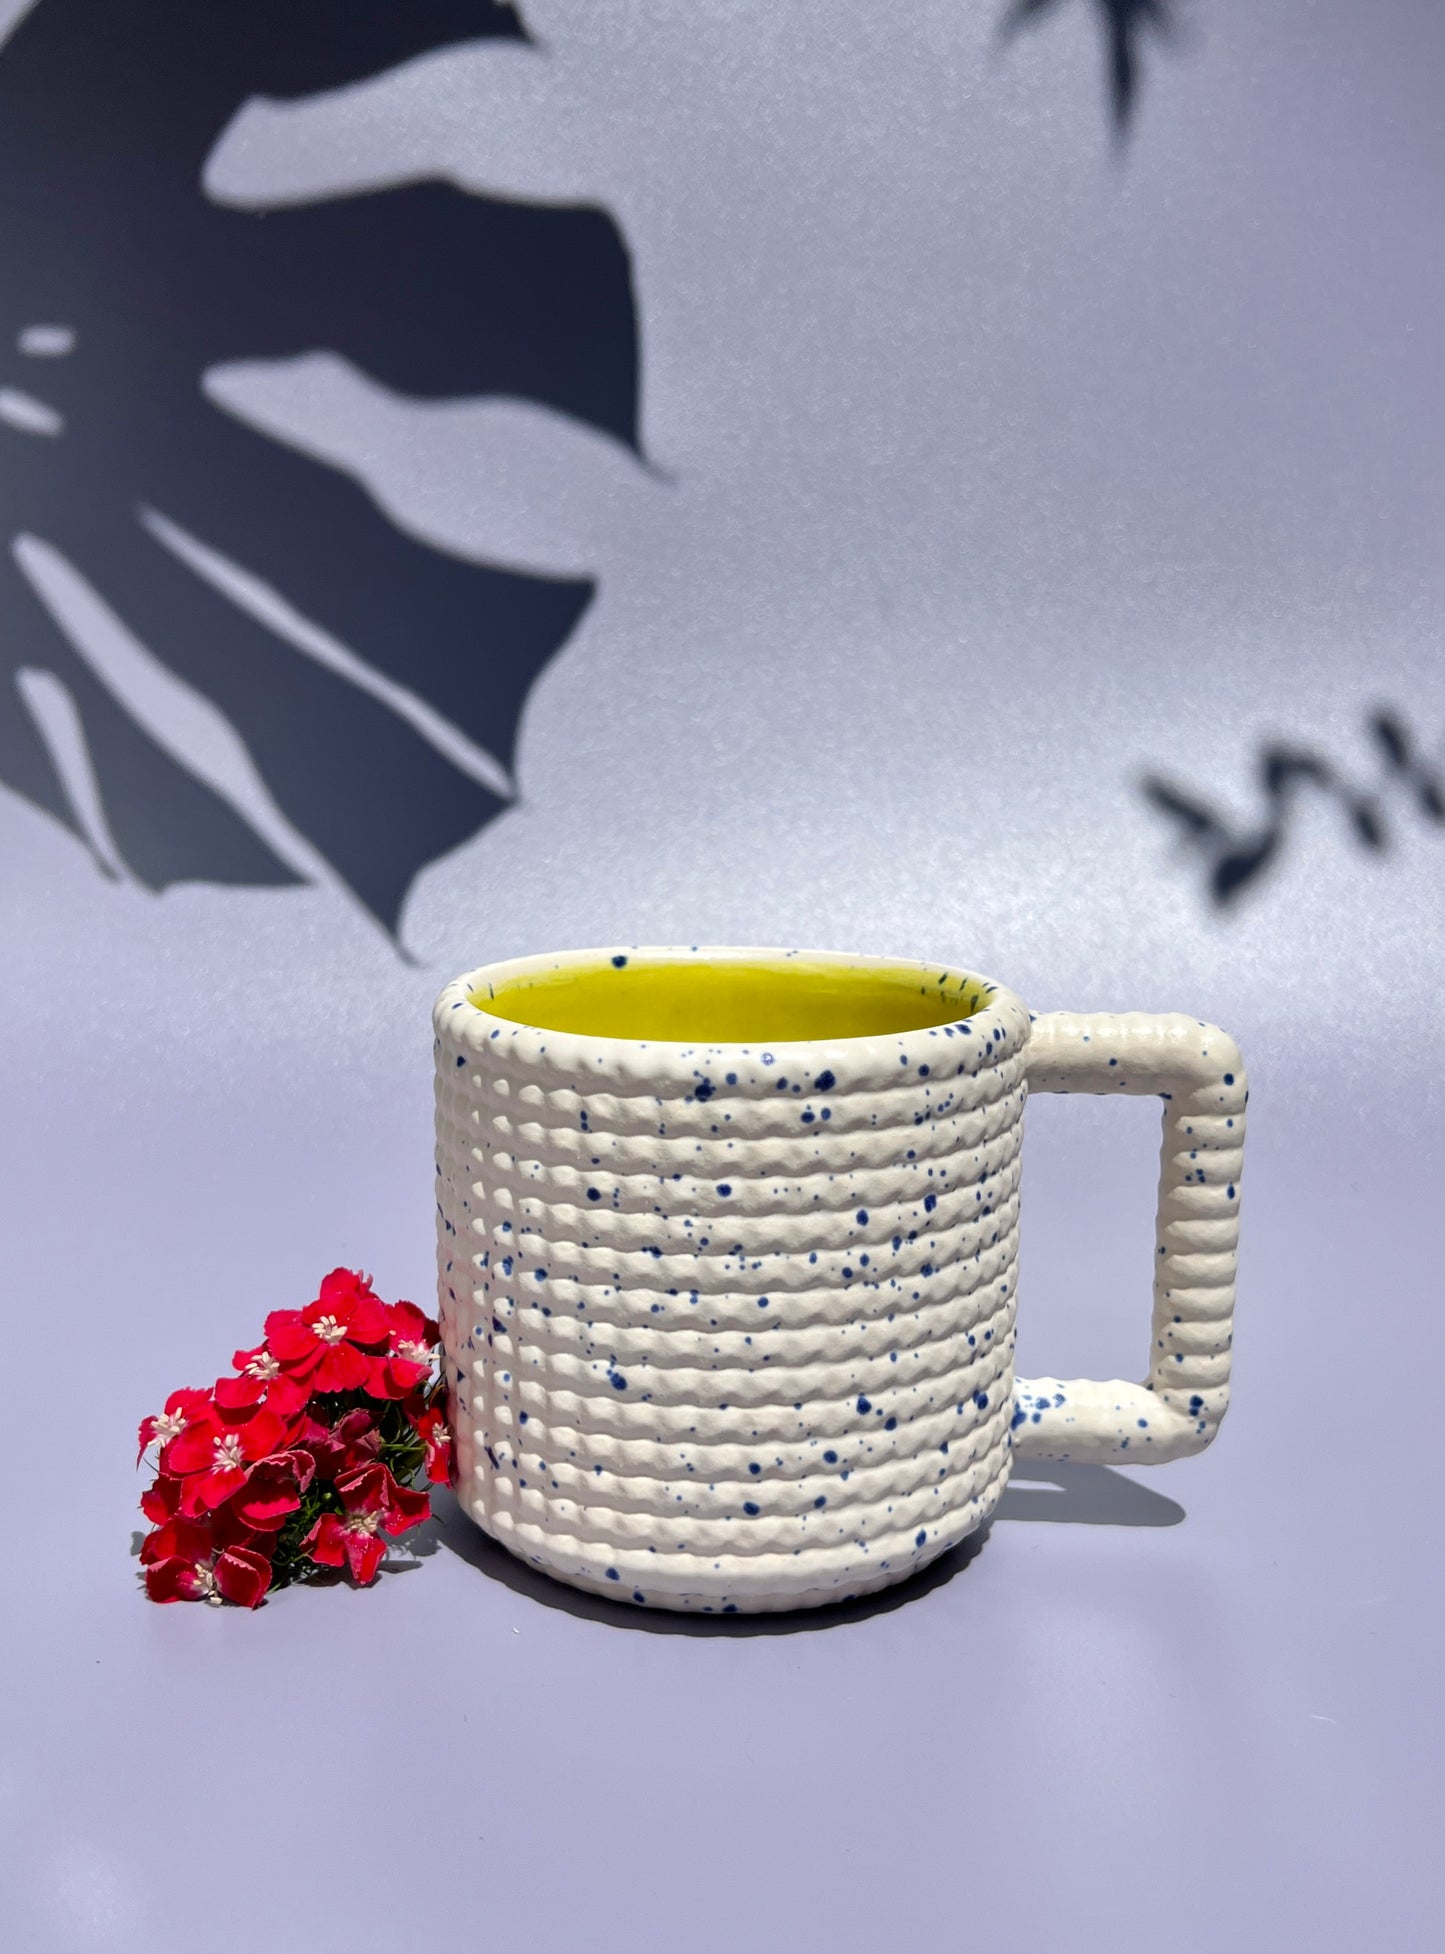 ♥PREORDER♥ Gozarian Mug with Little Dimple Texture in Matte White and Cobalt